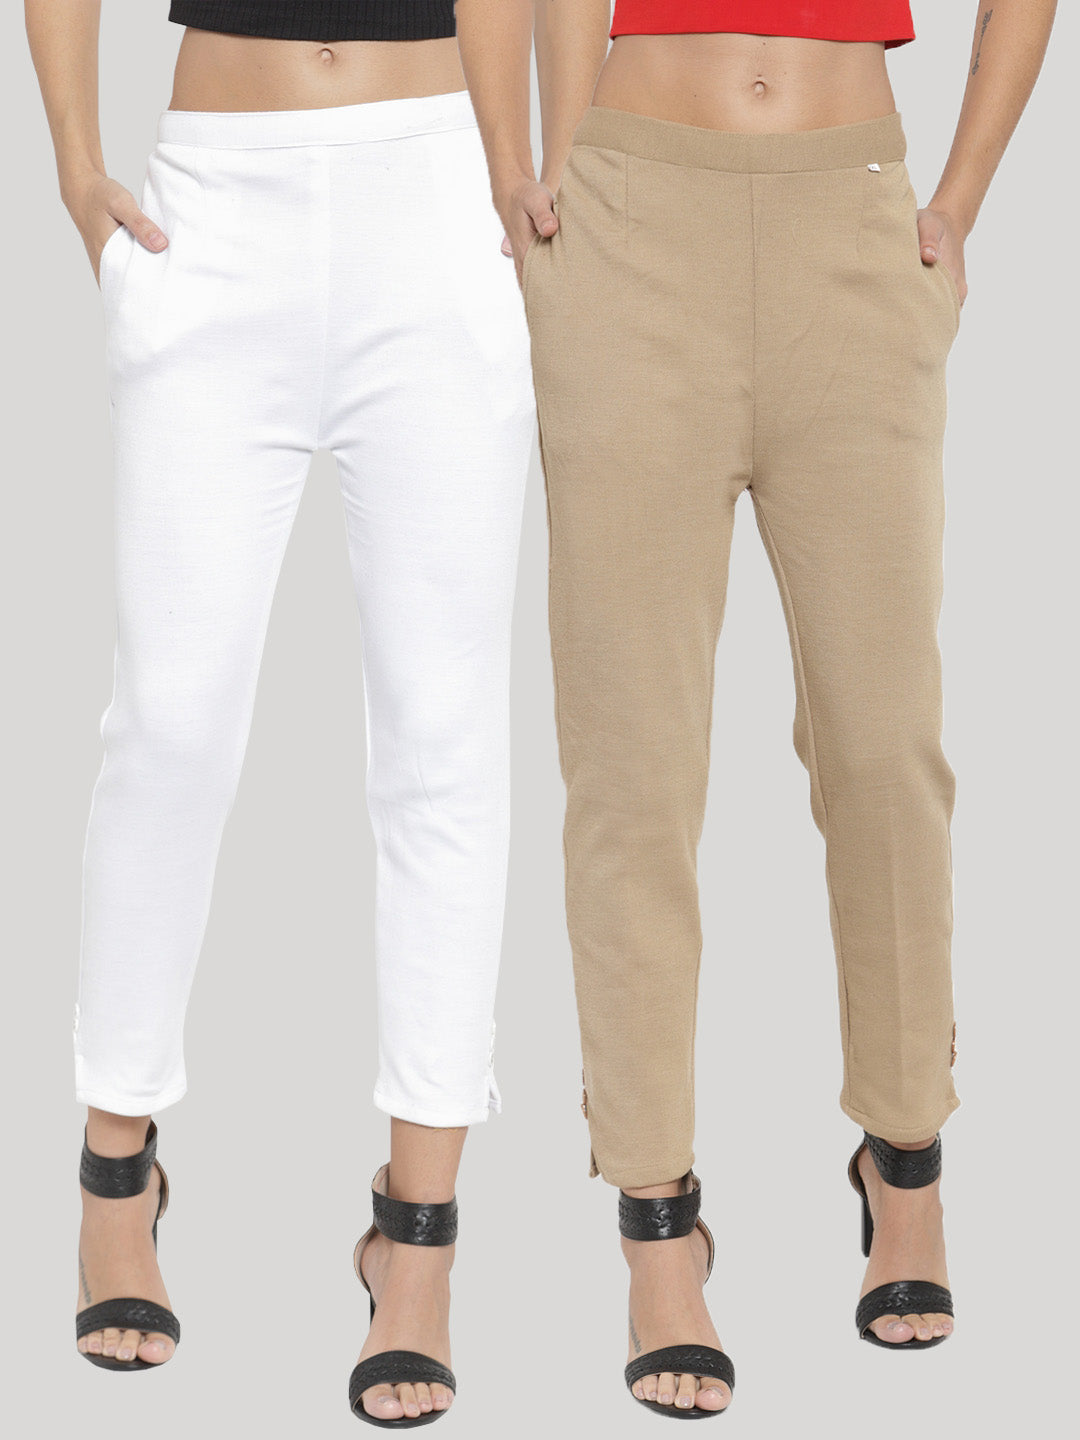 Clora White & Light Fawn Solid Woolen Trouser (Pack of 2)